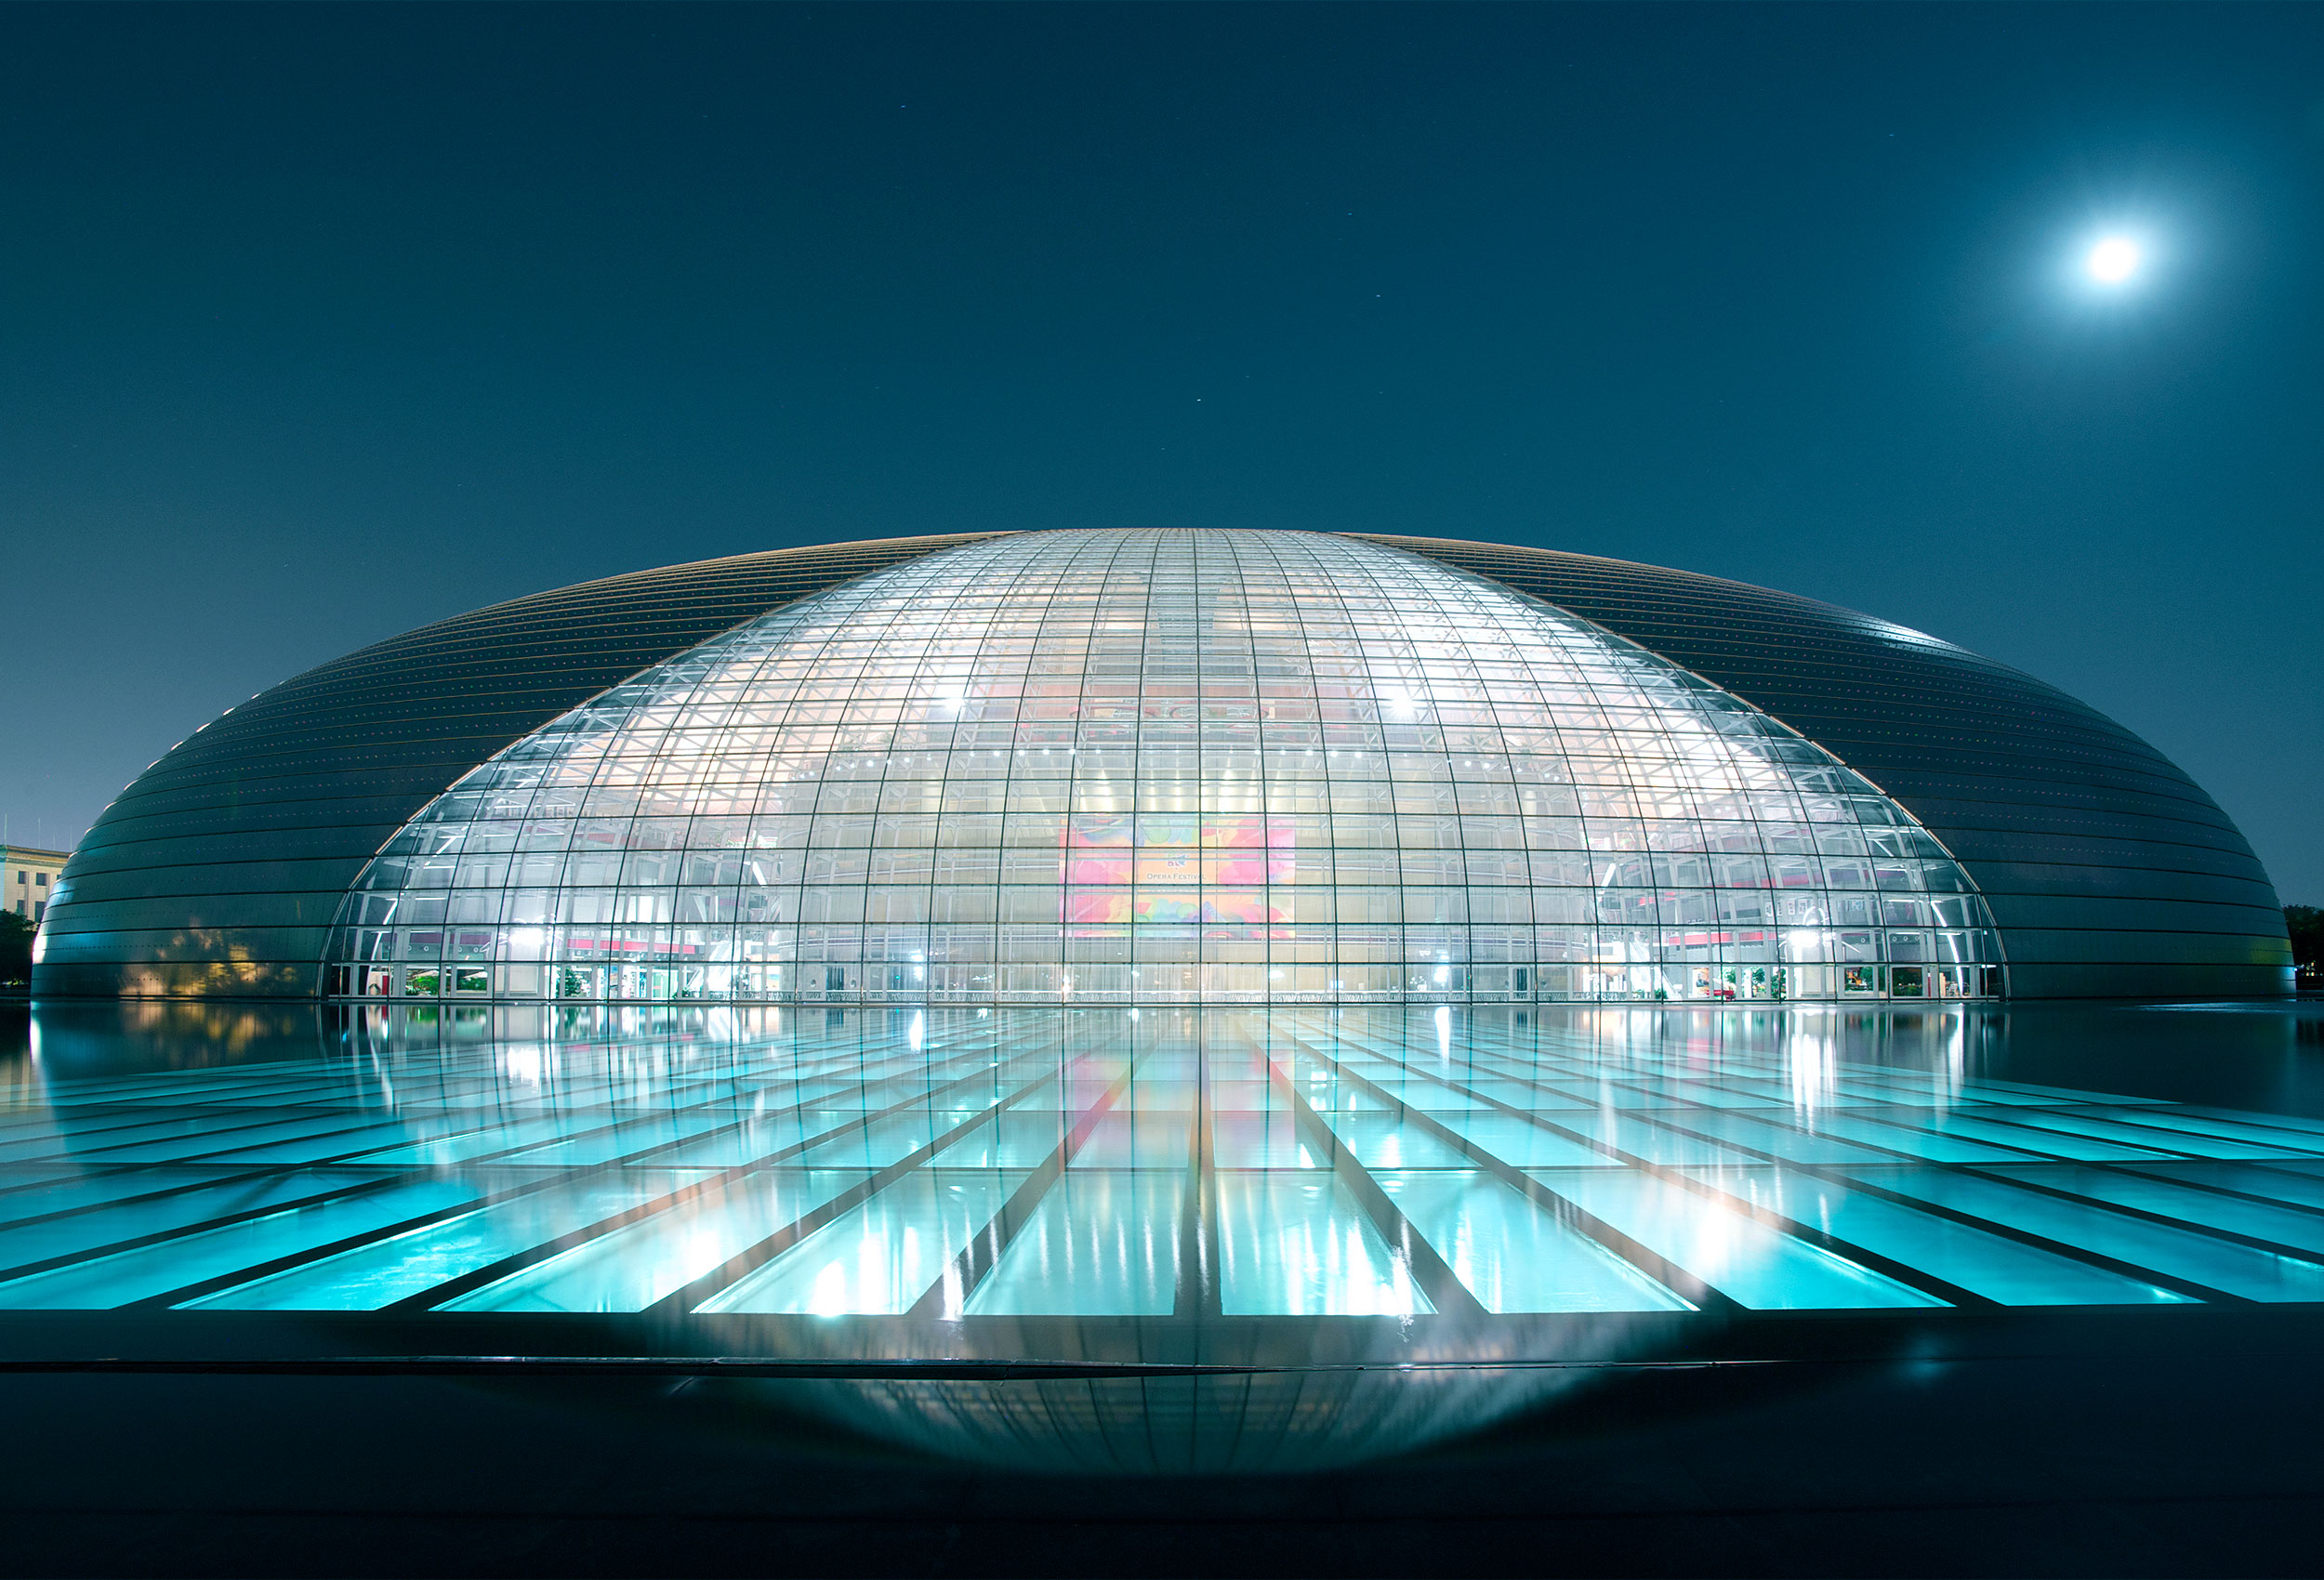 National Centre for Performing Arts in Beijing, China by architectural photographer Kristopher Grunert.